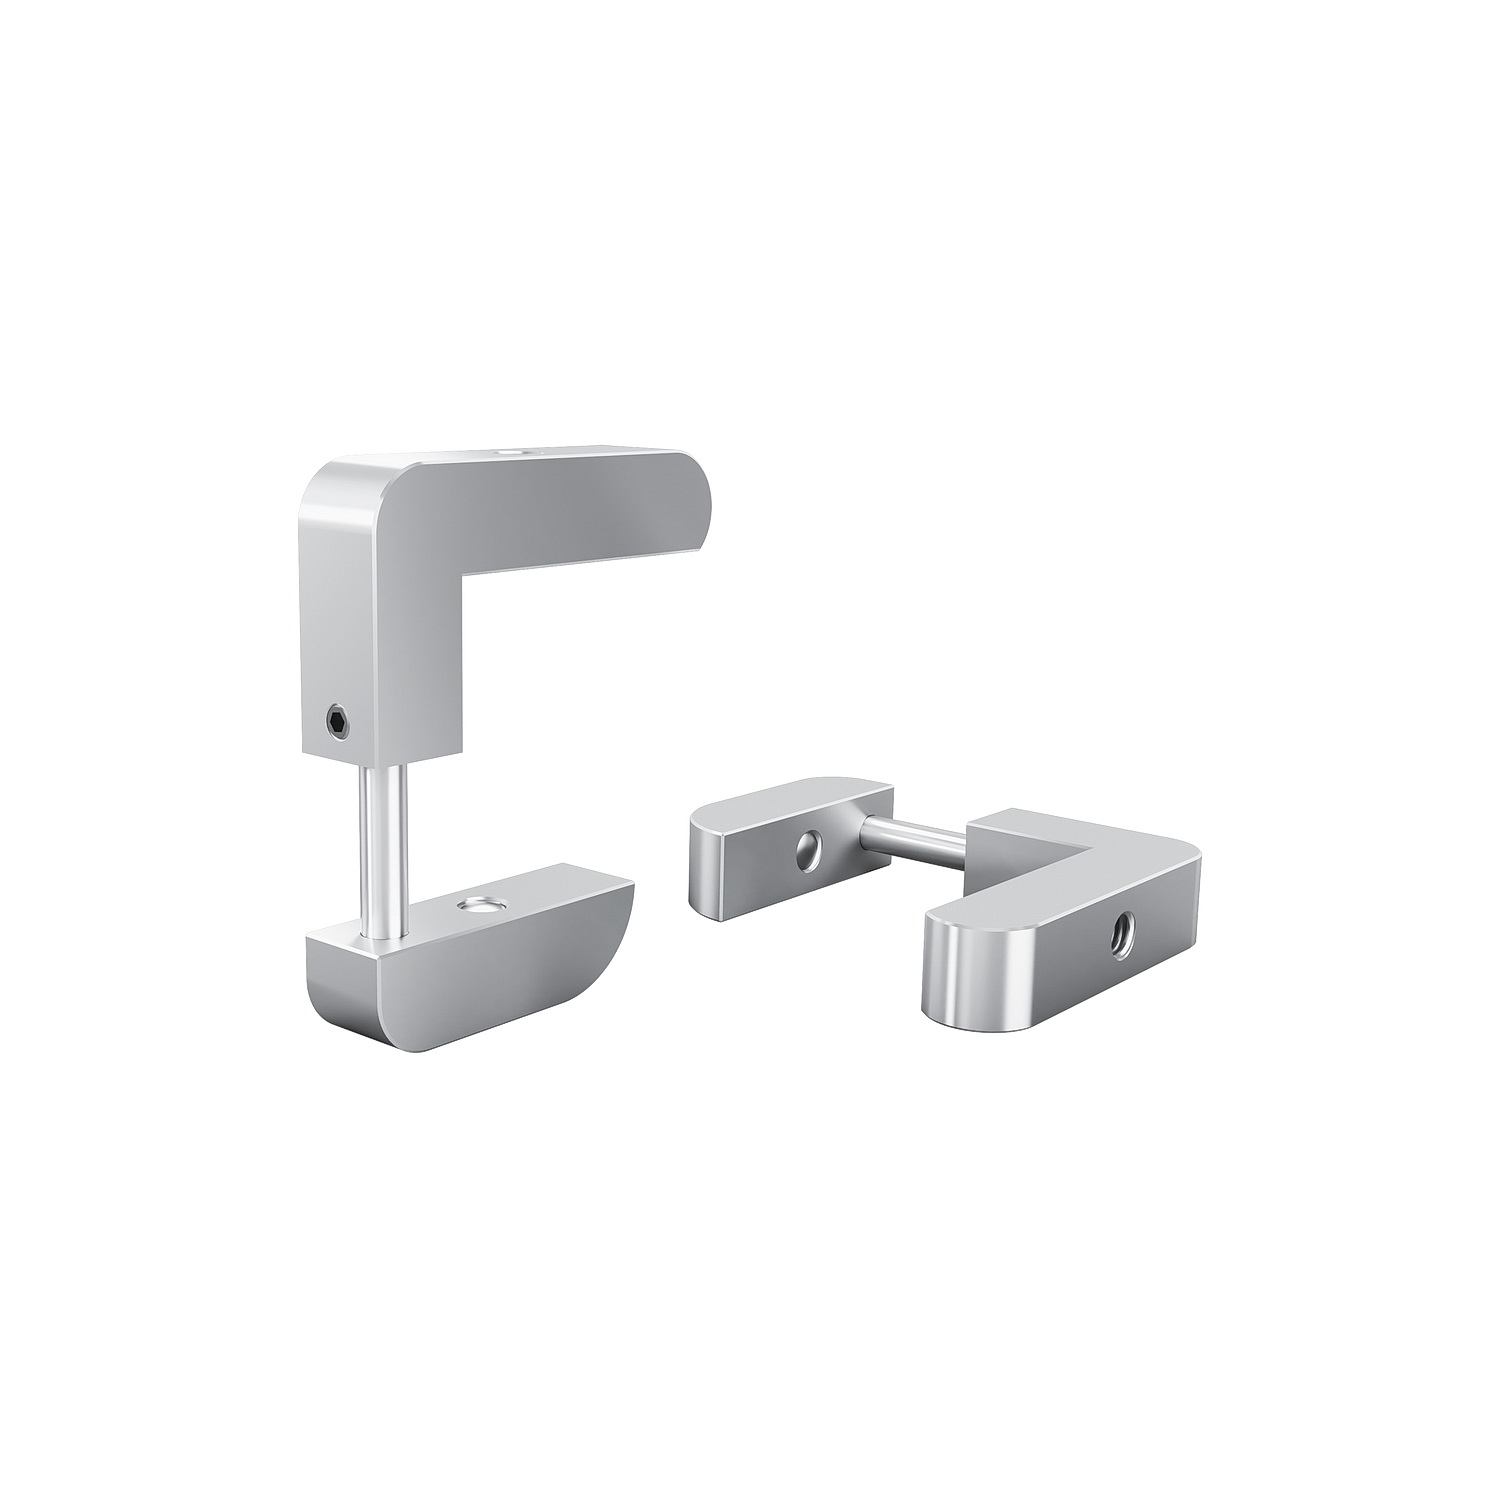 Set of 2, Adjustable Clamp, Aluminum Clear Anodized Finish, to Accommodate 3/4'' to 1-1/2'' Counters. M6 Thread on the top